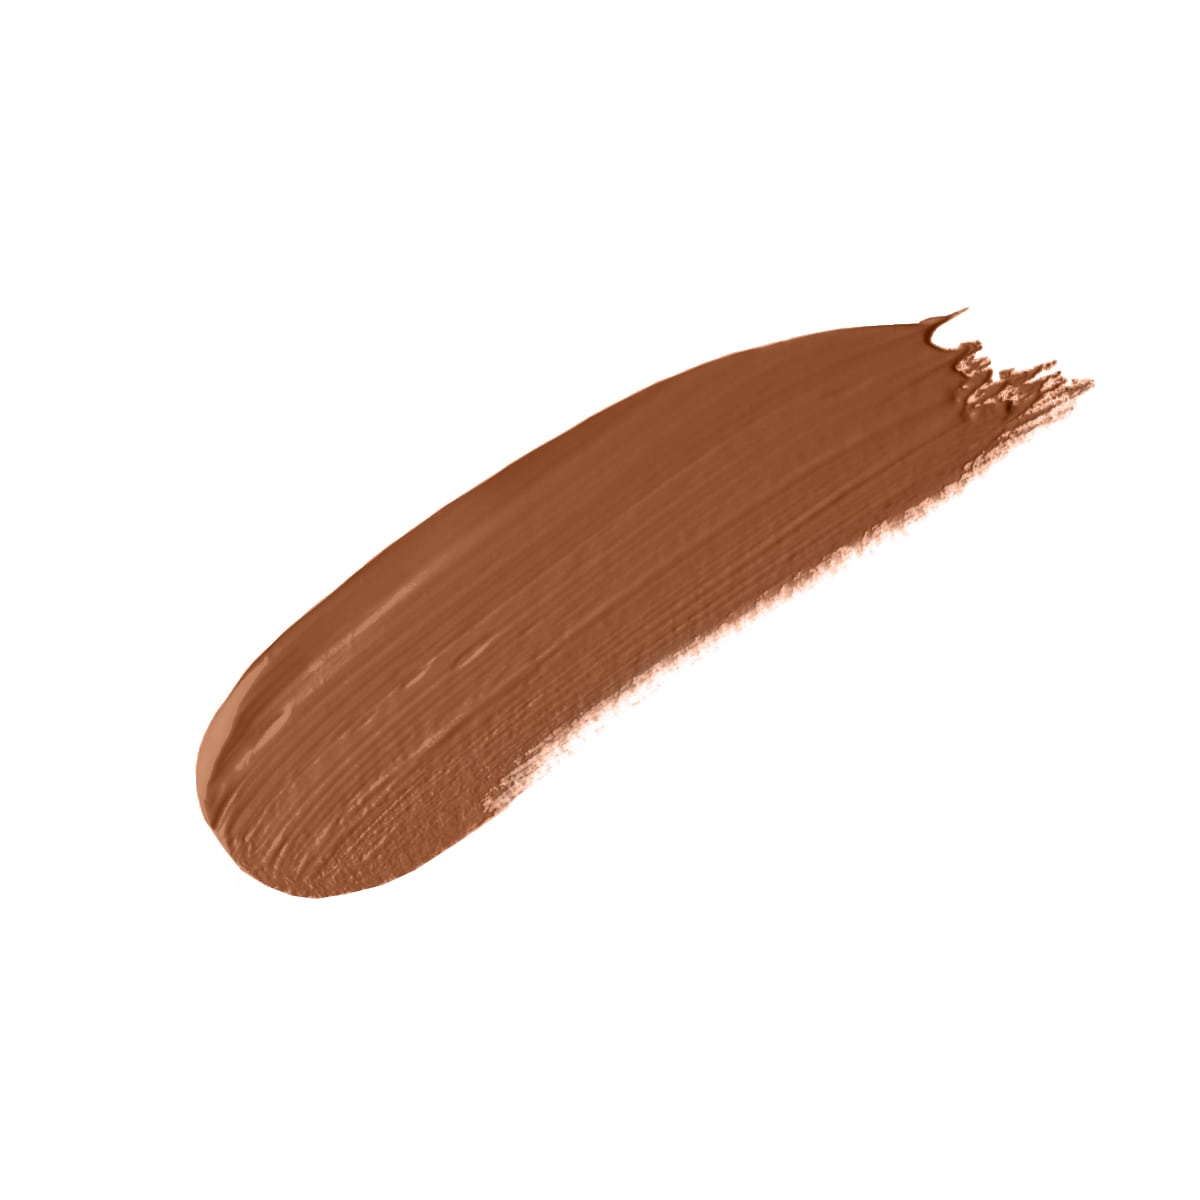 9 - CHOCOLATE - buildable, creamy, hydrating concealer in chocolate undertone shade nine